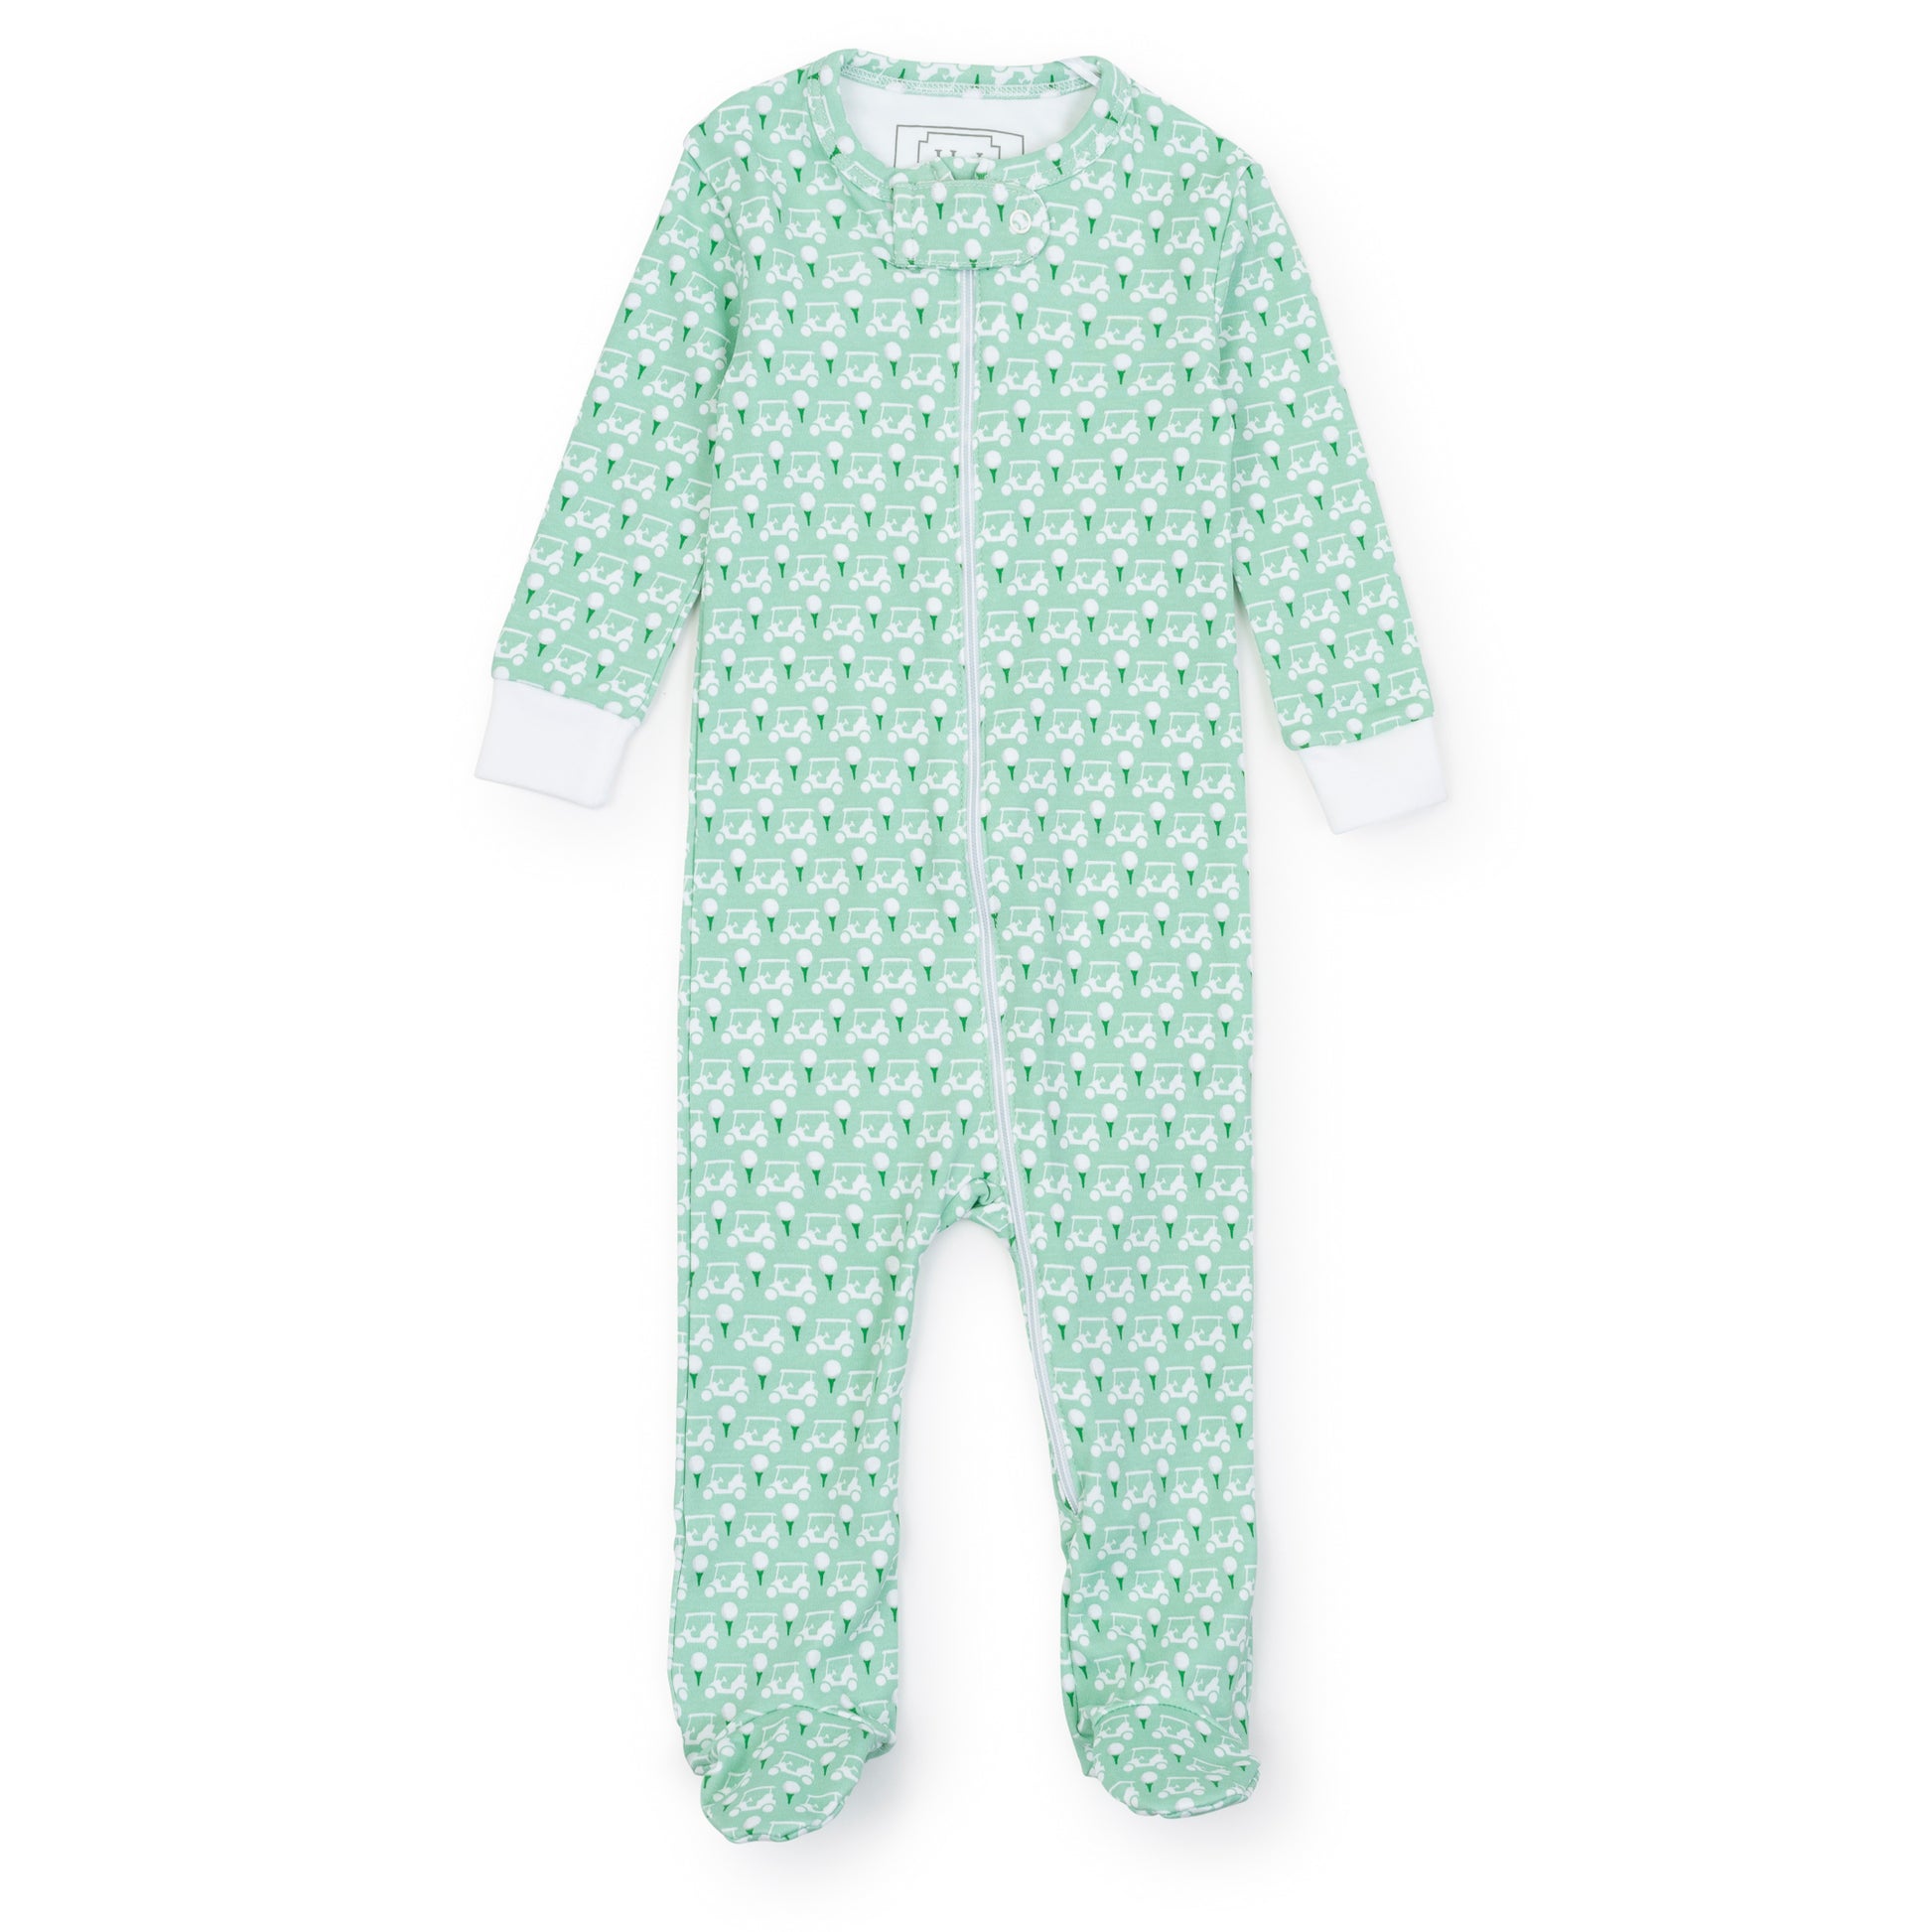 Lila and Hayes Parker Zipper Pajama - Golf Putting Green